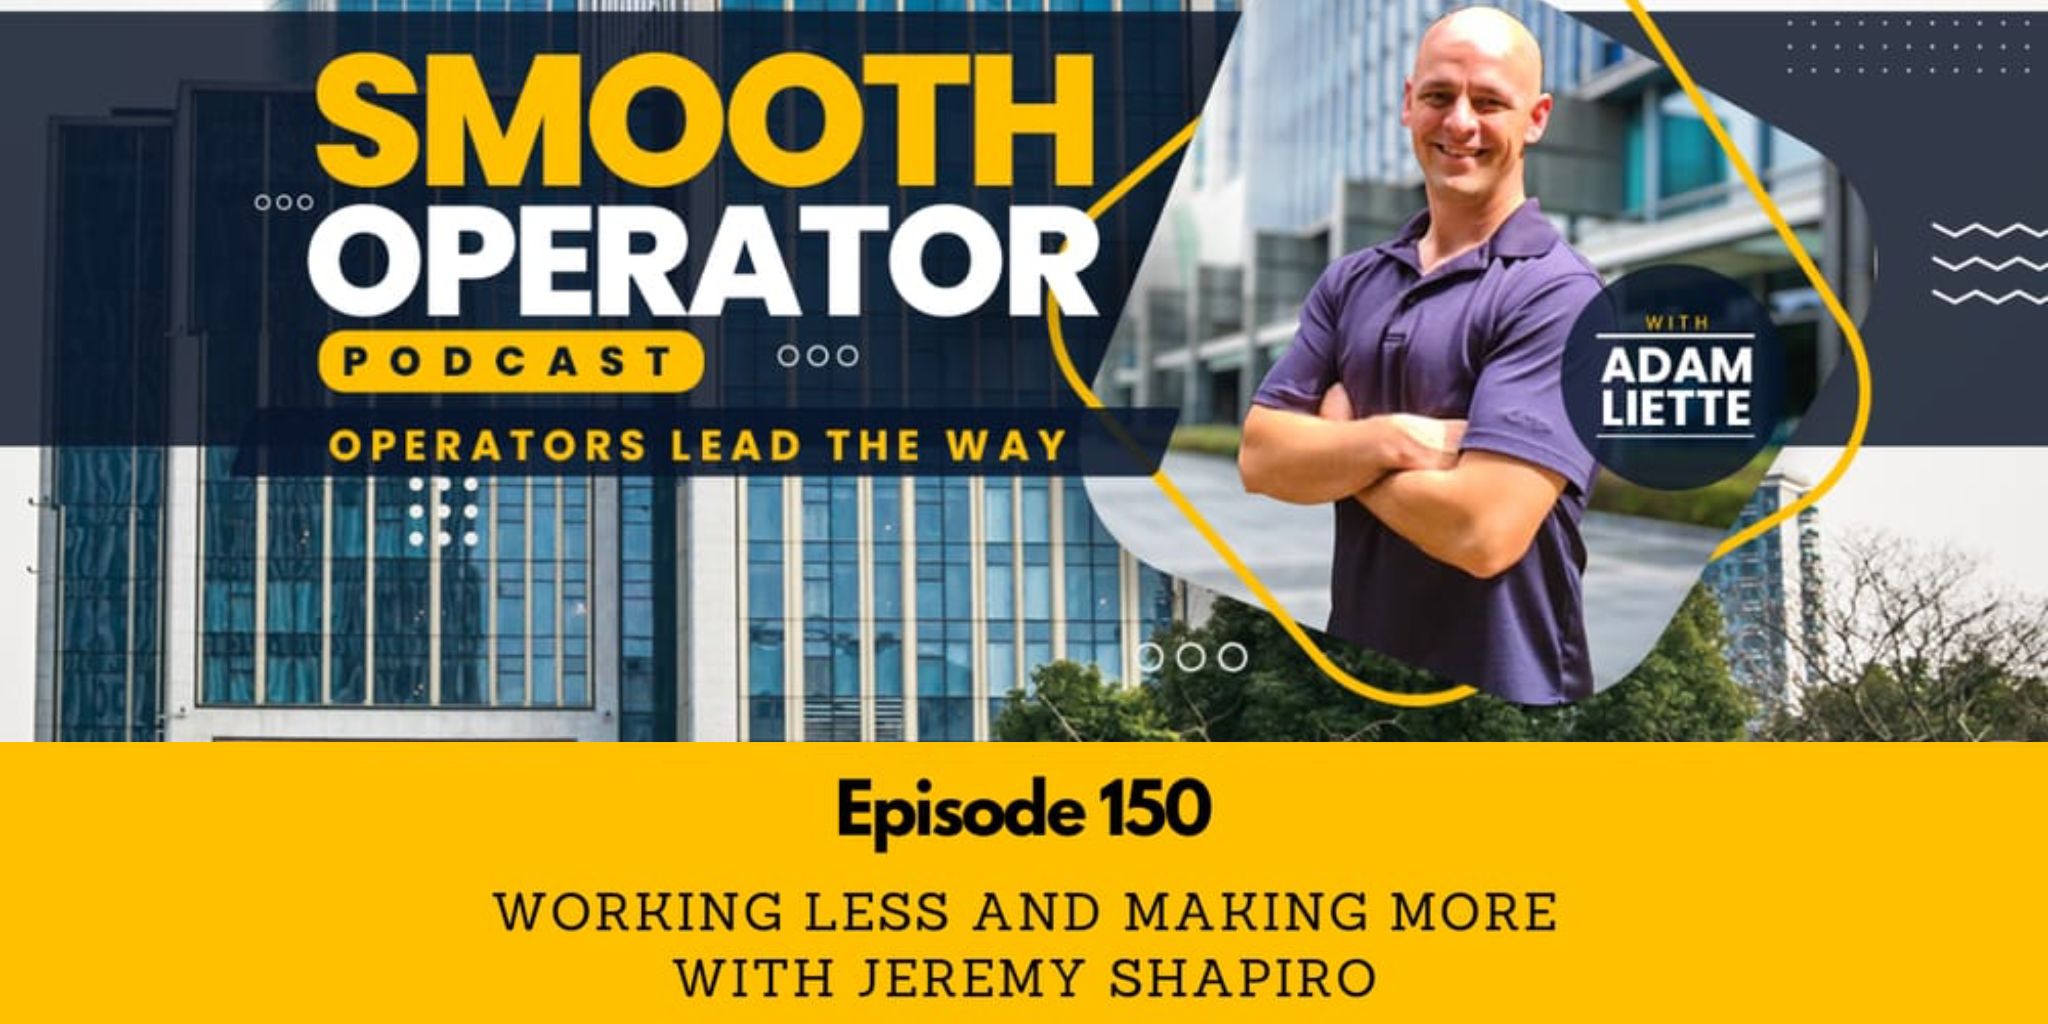 Smooth Operator: Working Less and Making More